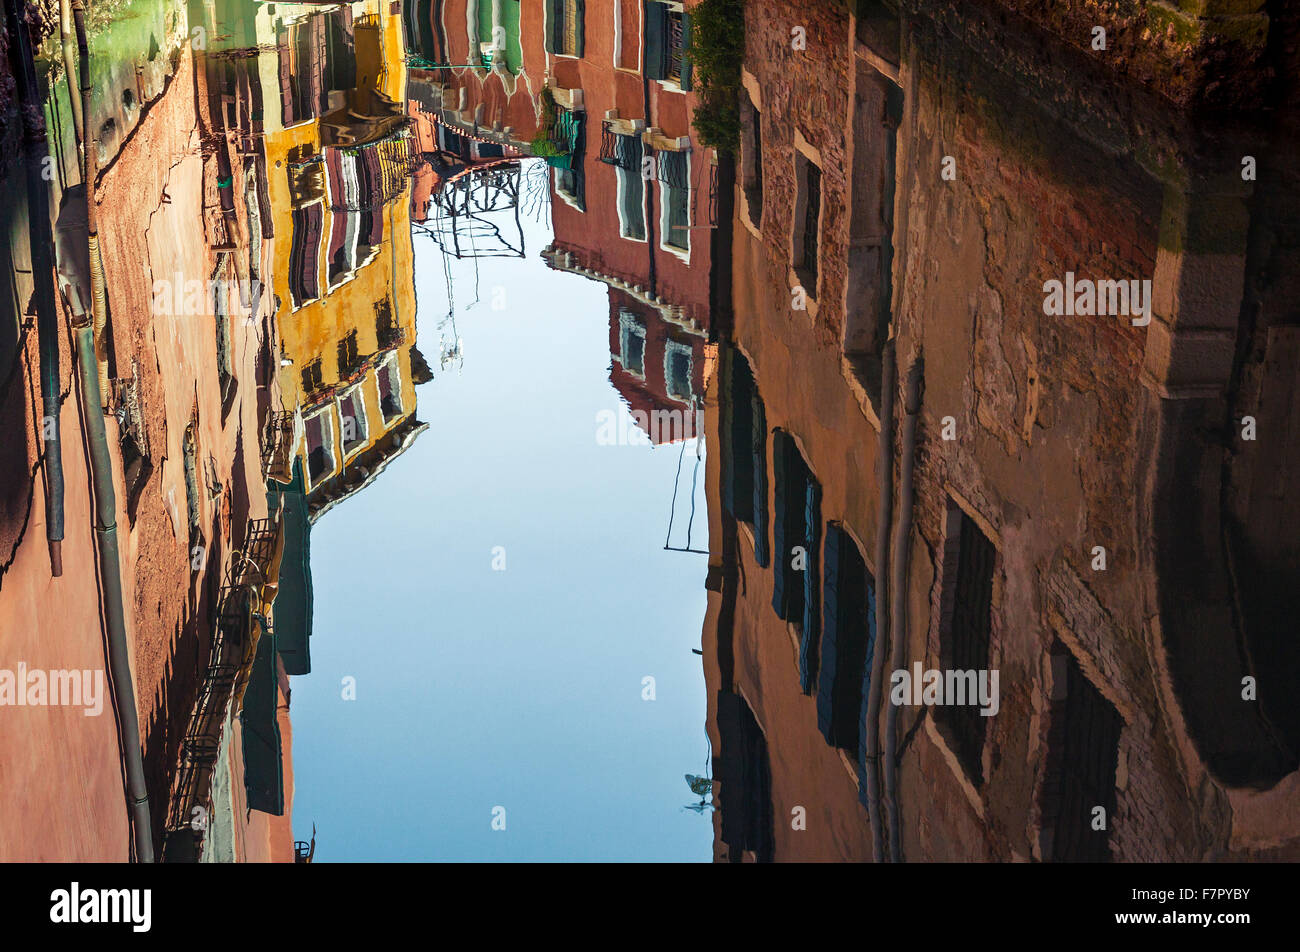 Venice architecture upside down reflection in canal water Stock Photo